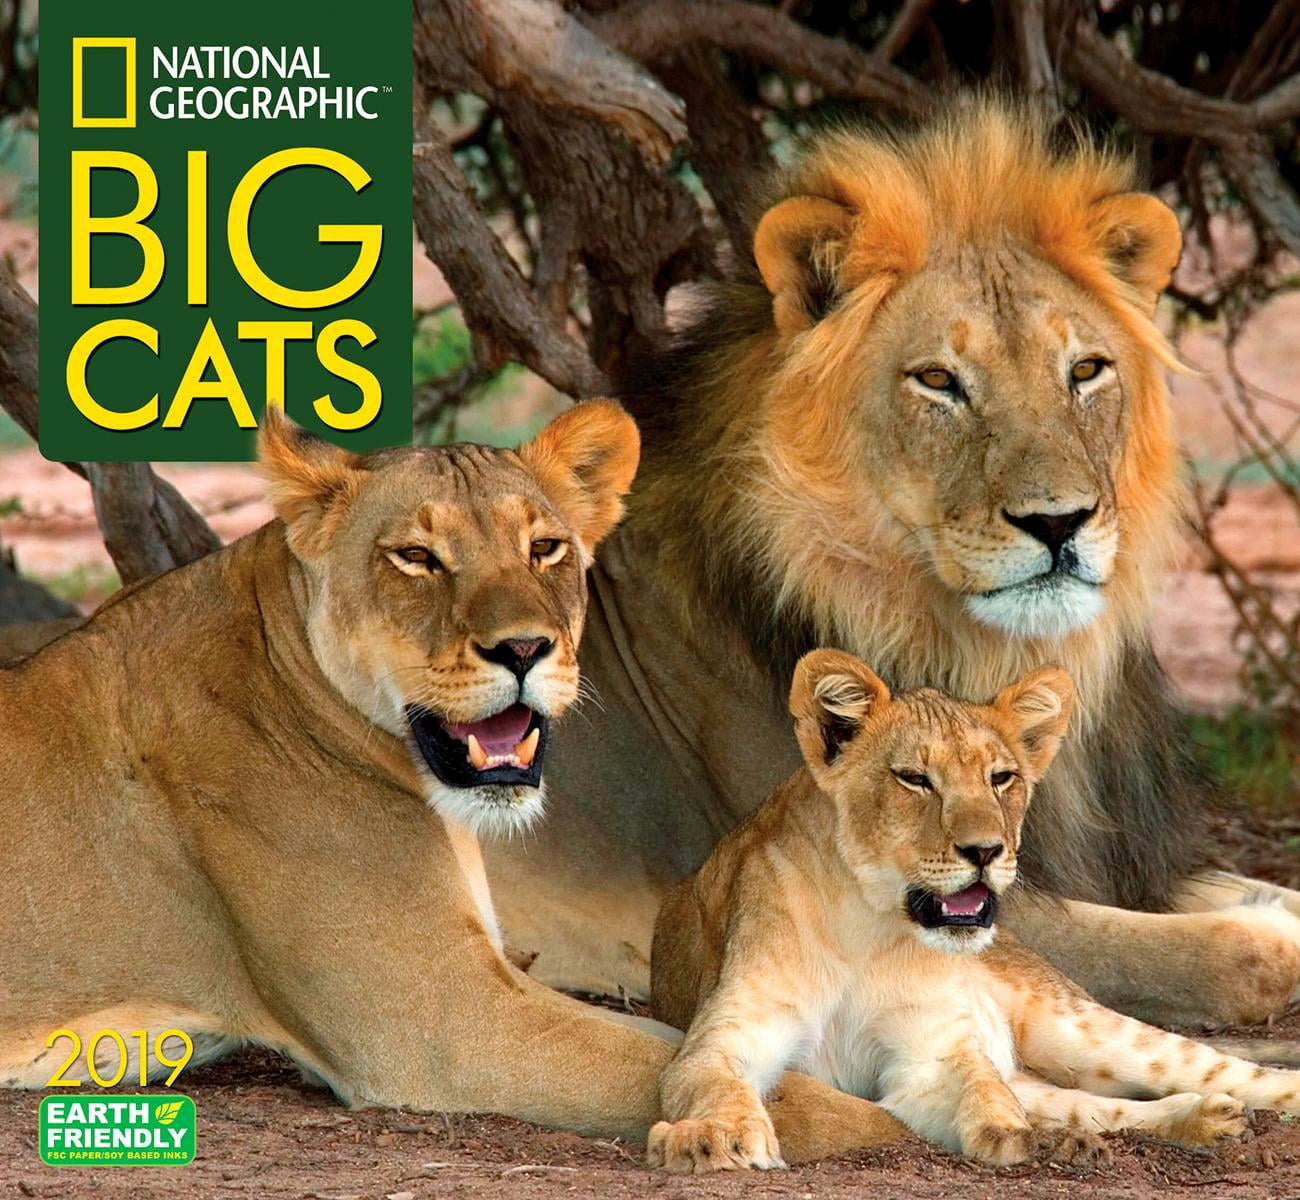 National Geographic Big Cats 2019 Calendar Other